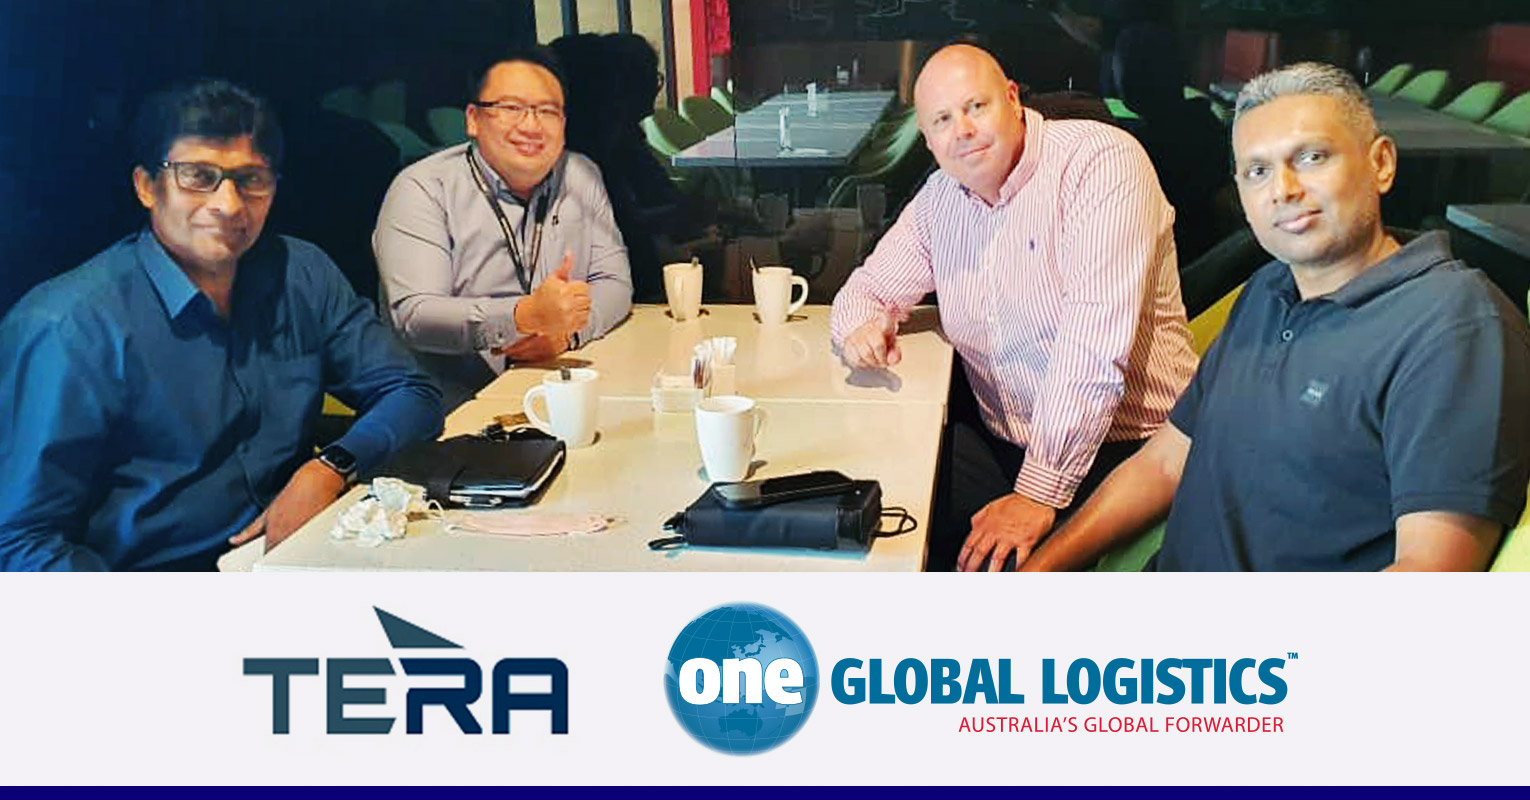 Tera Projects met with James Sparke of One Global Logistics in Malaysia